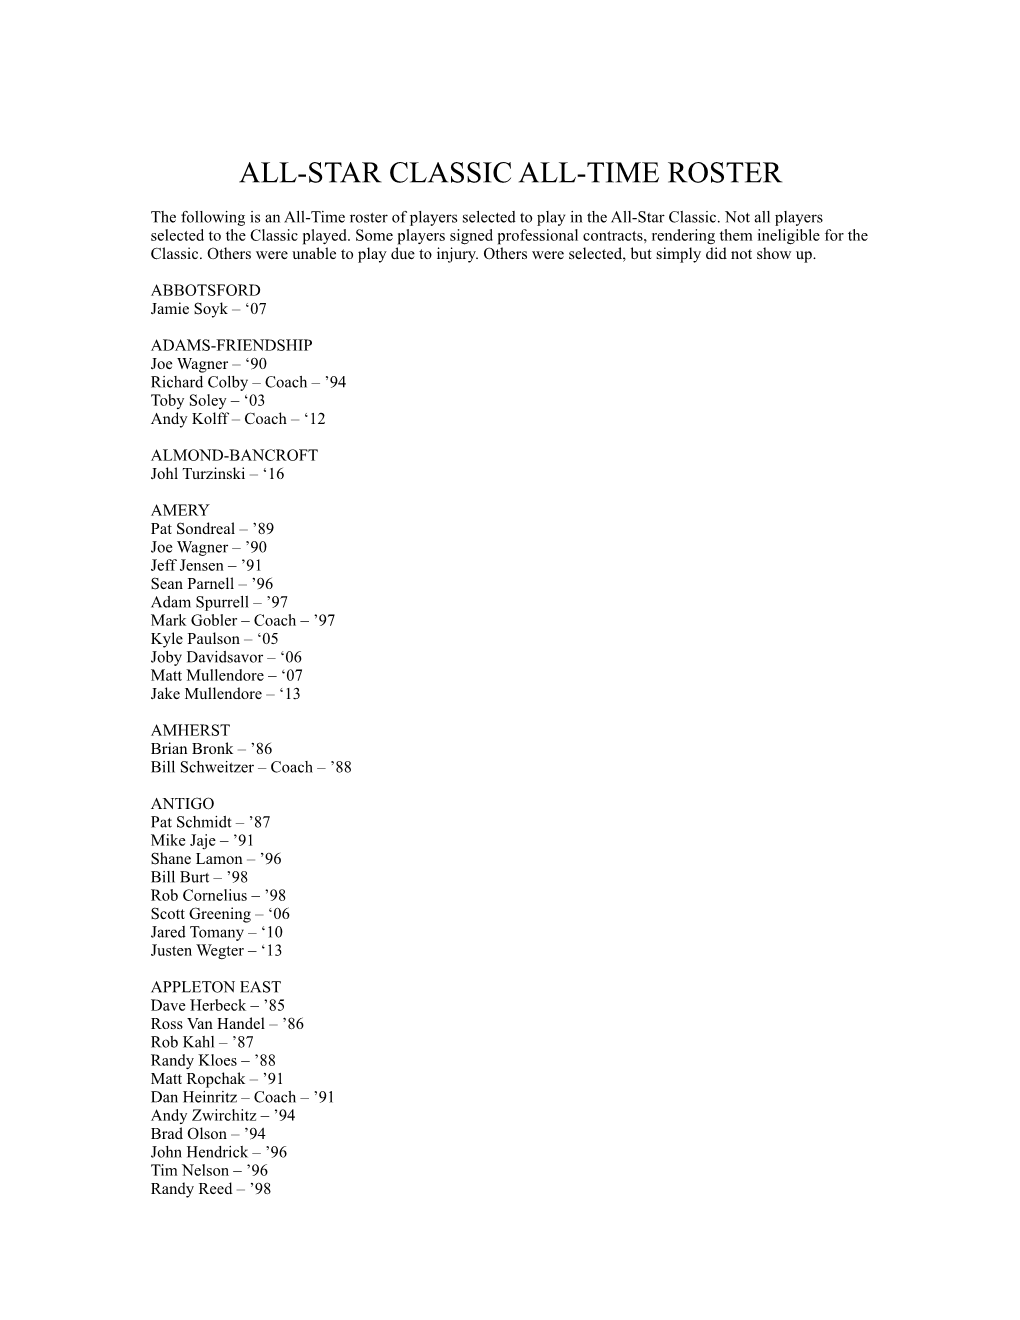 ALL-Time Roster All Star Classic